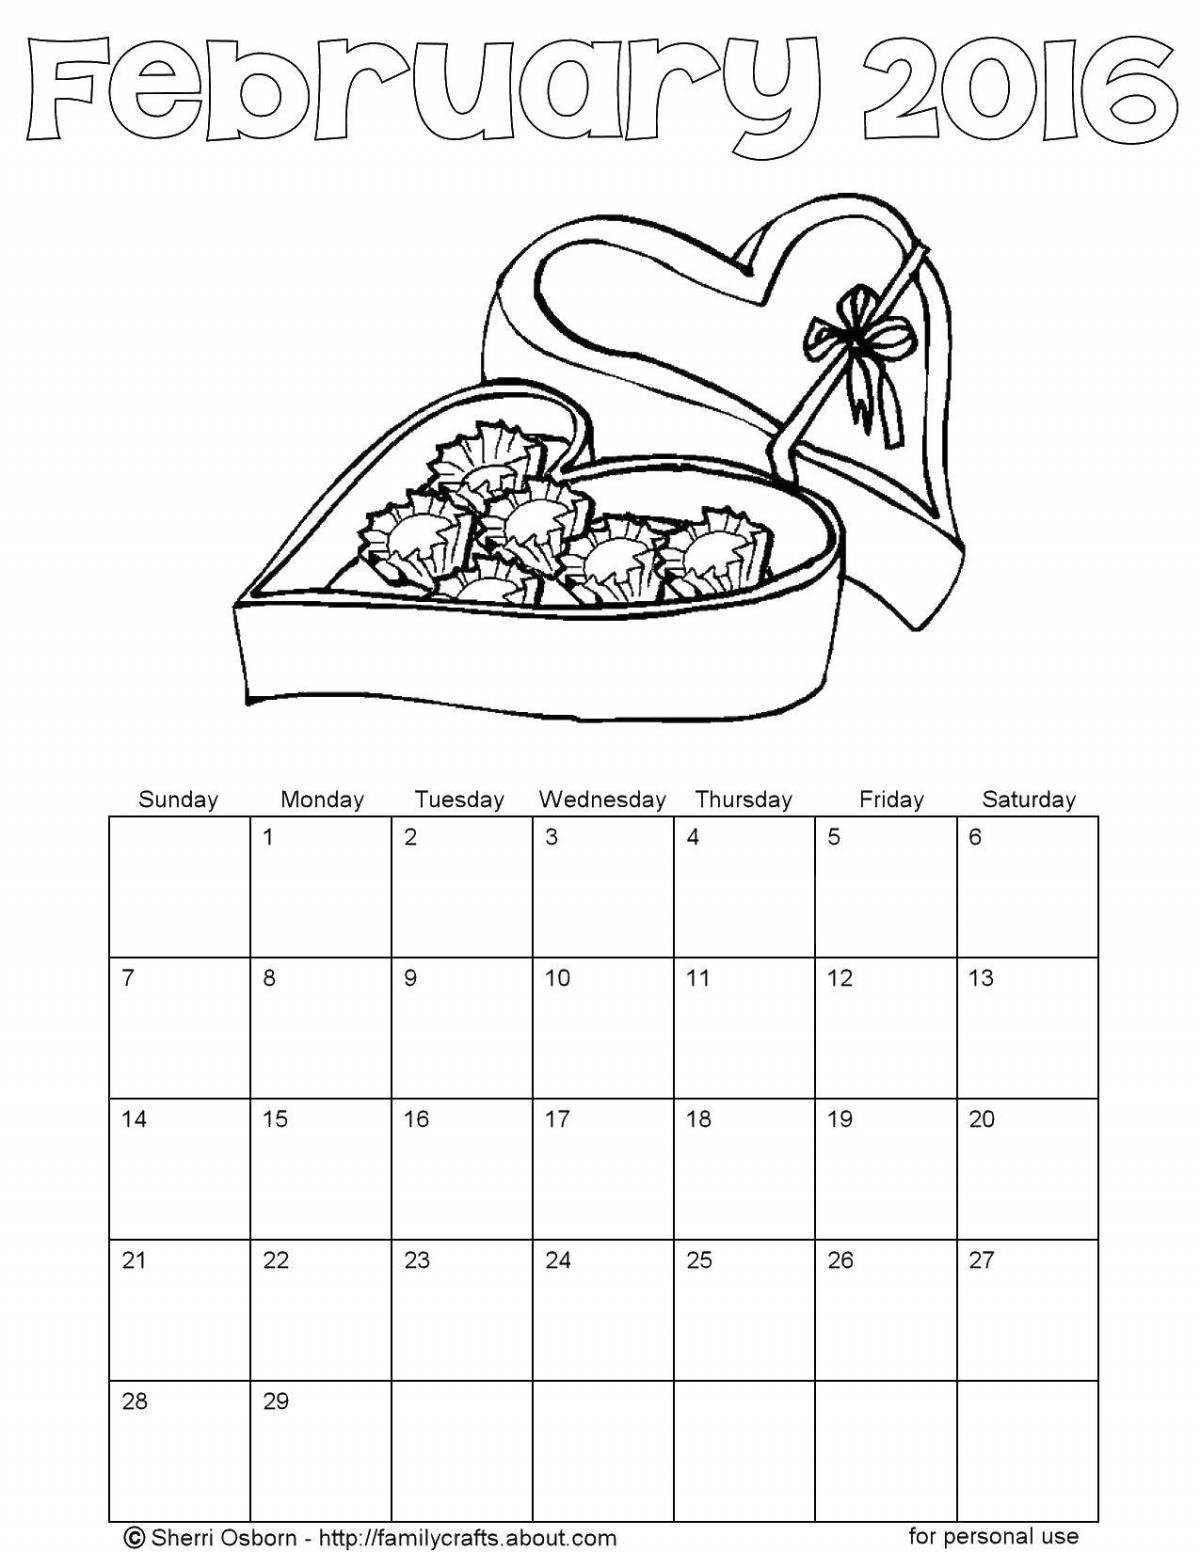 February Festive Coloring Page